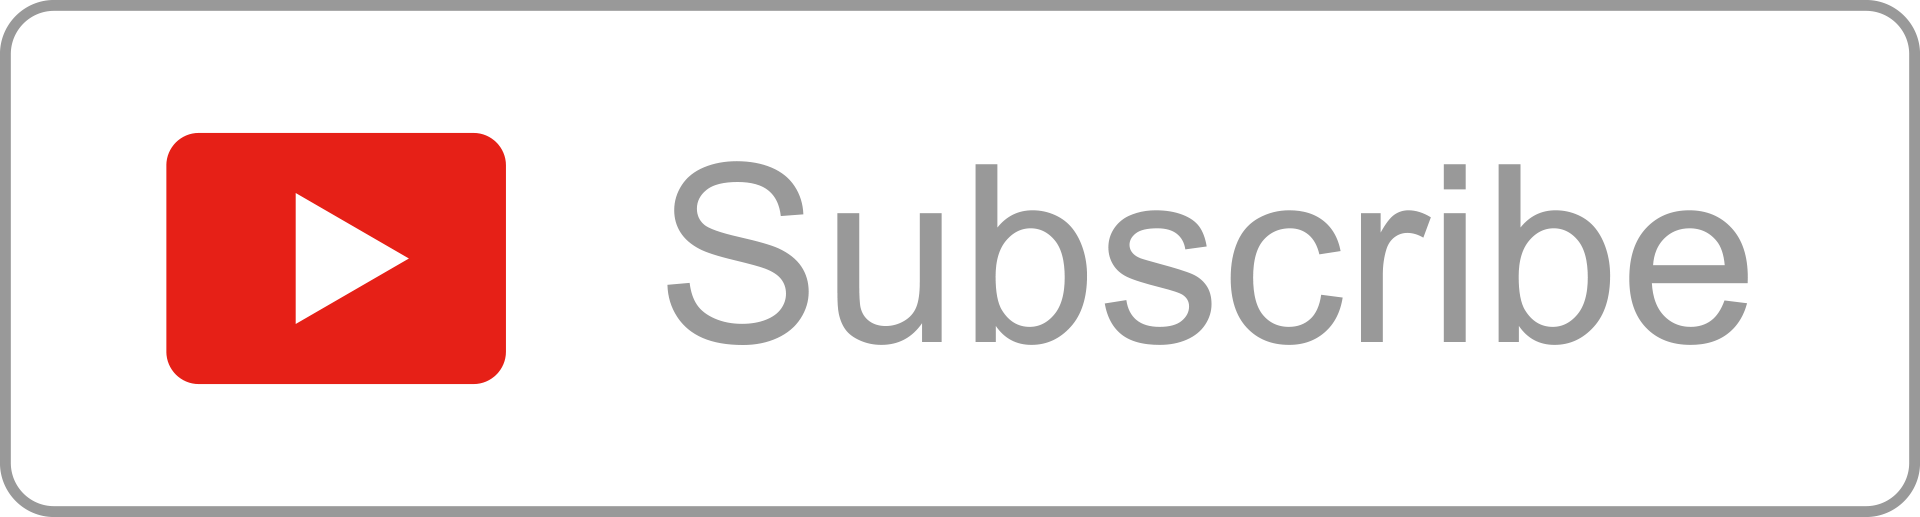 Subscribe and follow me button for your youtube Vector Image